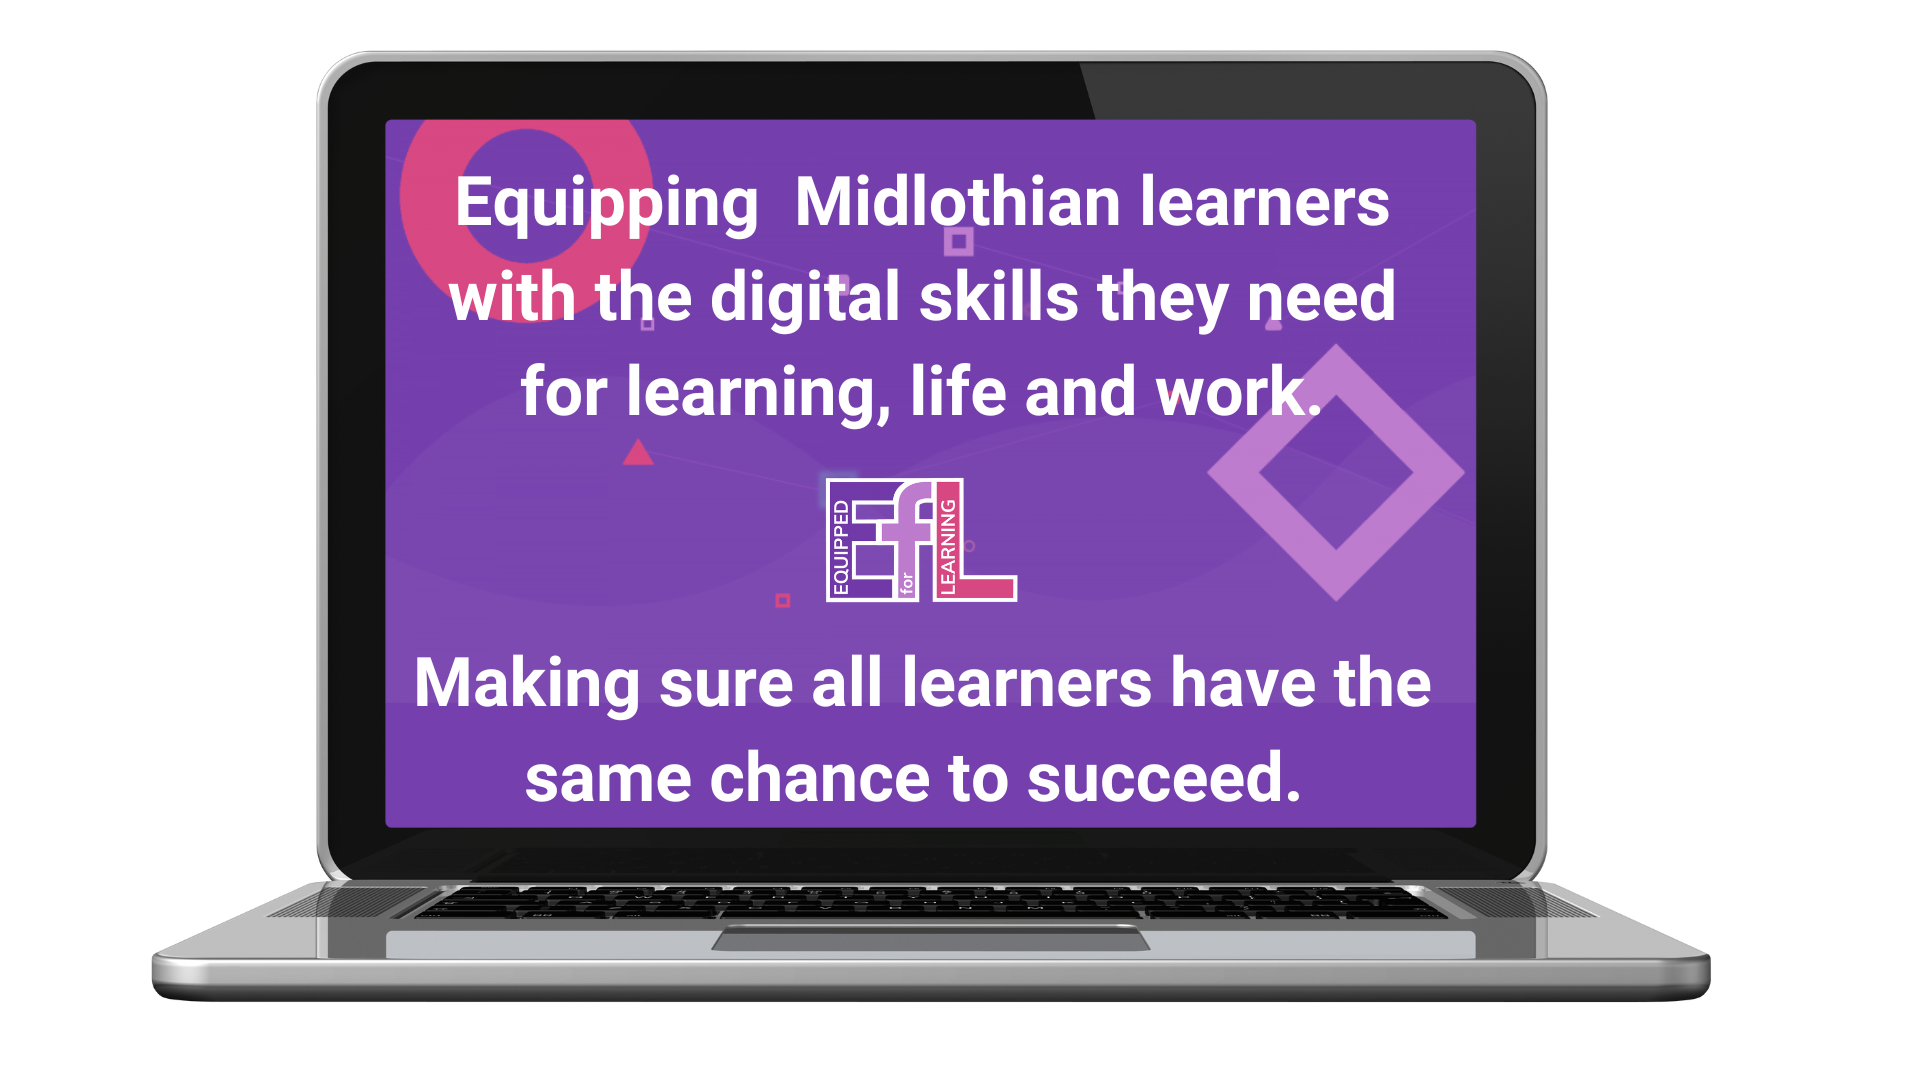 We are proud to say Midlothian is the first local authority in Scotland to launch a world-class digital learning project for all Primary 1 to Secondary 6 pupils. This programme will benefit young people and our staff by: Providing a safe, secure and inclusive learning environment that all school age pupils can access equally. Giving pupils the tools to take greater control of their learning with the ability to access materials on their device at anytime from anywhere. Technically supporting the opportunities and demands of remote learning. Using the platform Google Workspace – popular across many industries – to help pupils and staff develop digital skills for life and work.